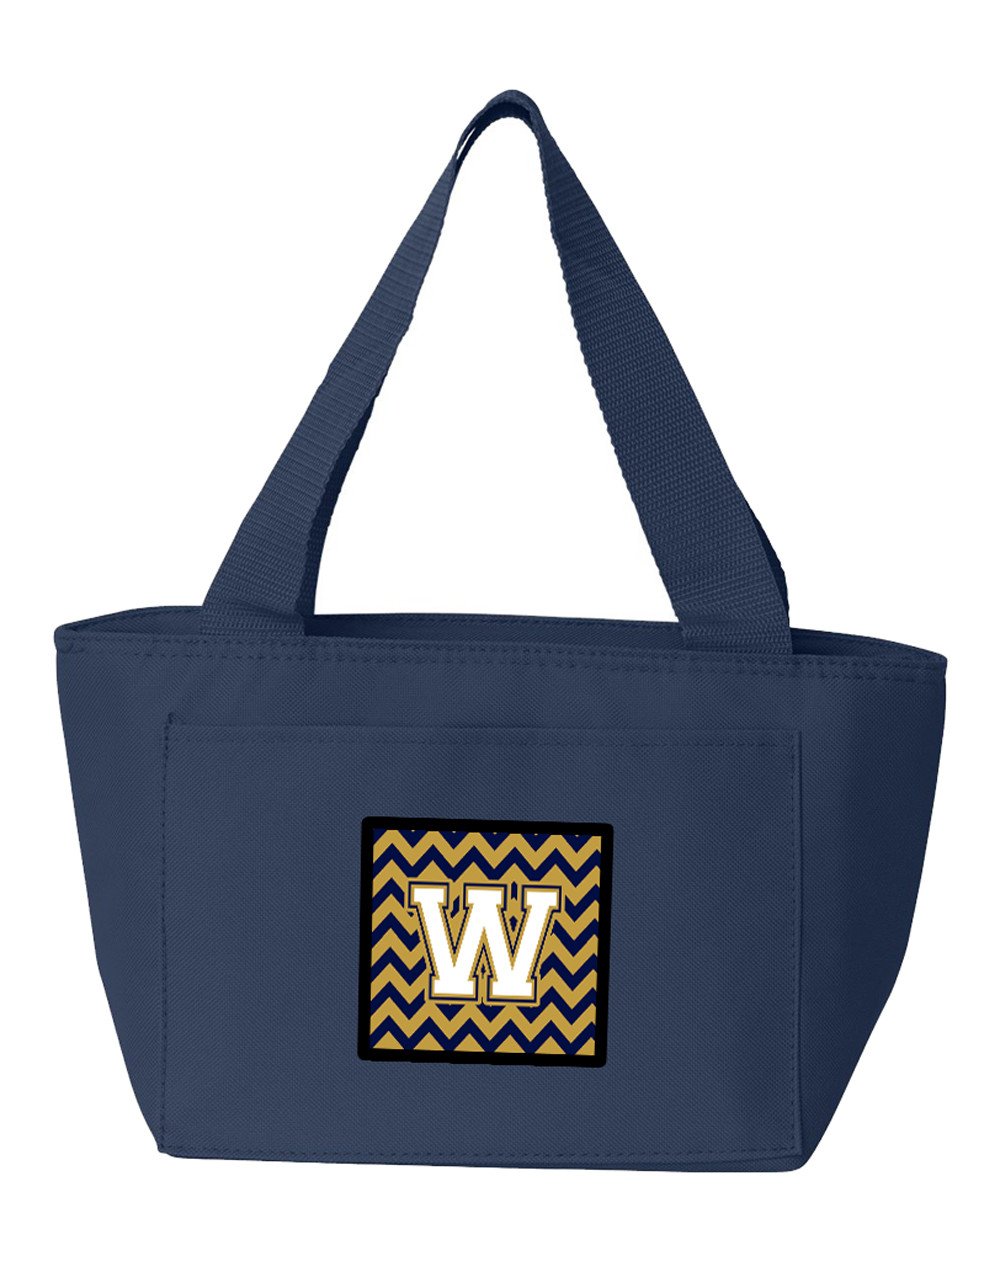 Letter W Chevron Navy Blue and Gold Lunch Bag CJ1057-WNA-8808 by Caroline's Treasures